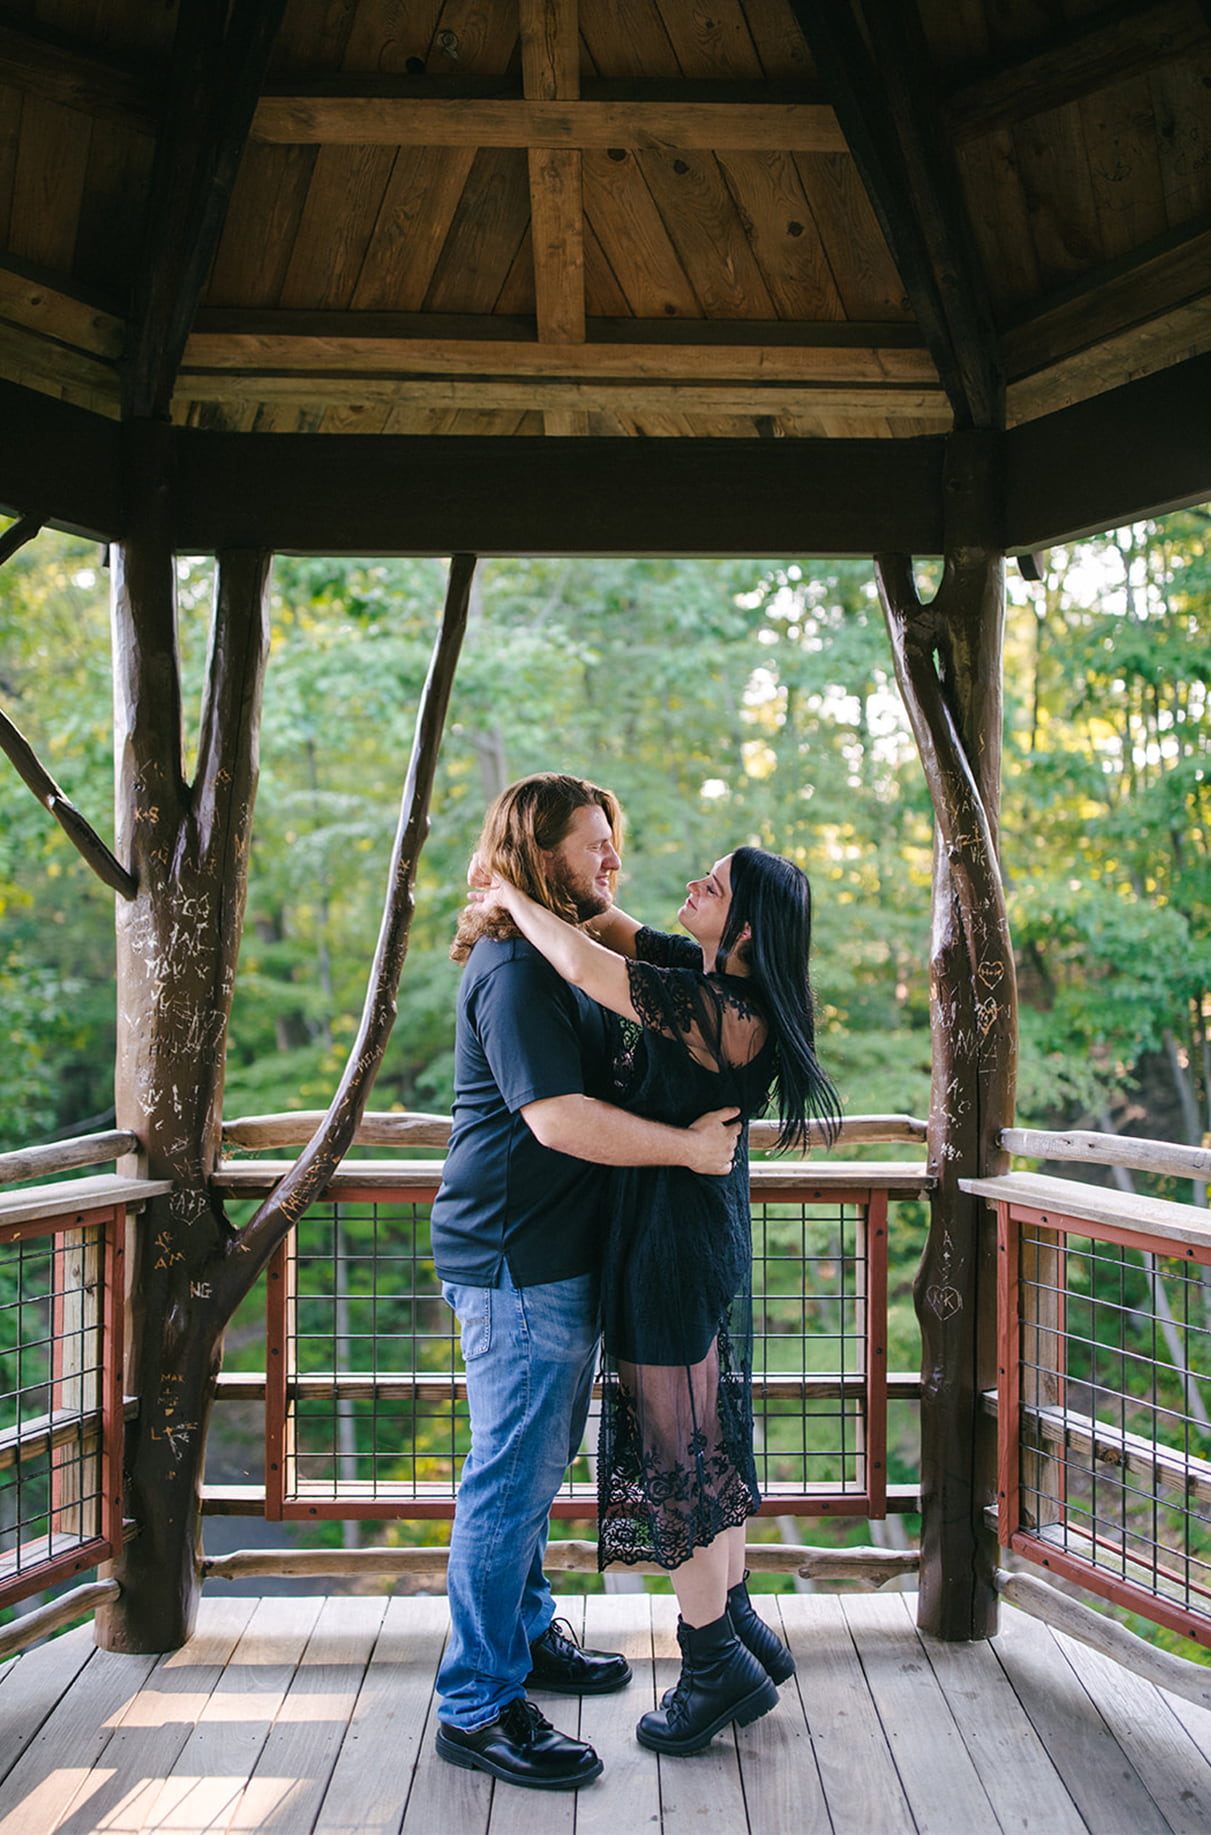 Couple embracing inside David Wenzel Treehouse at Nay Aug Park in Scranton PA